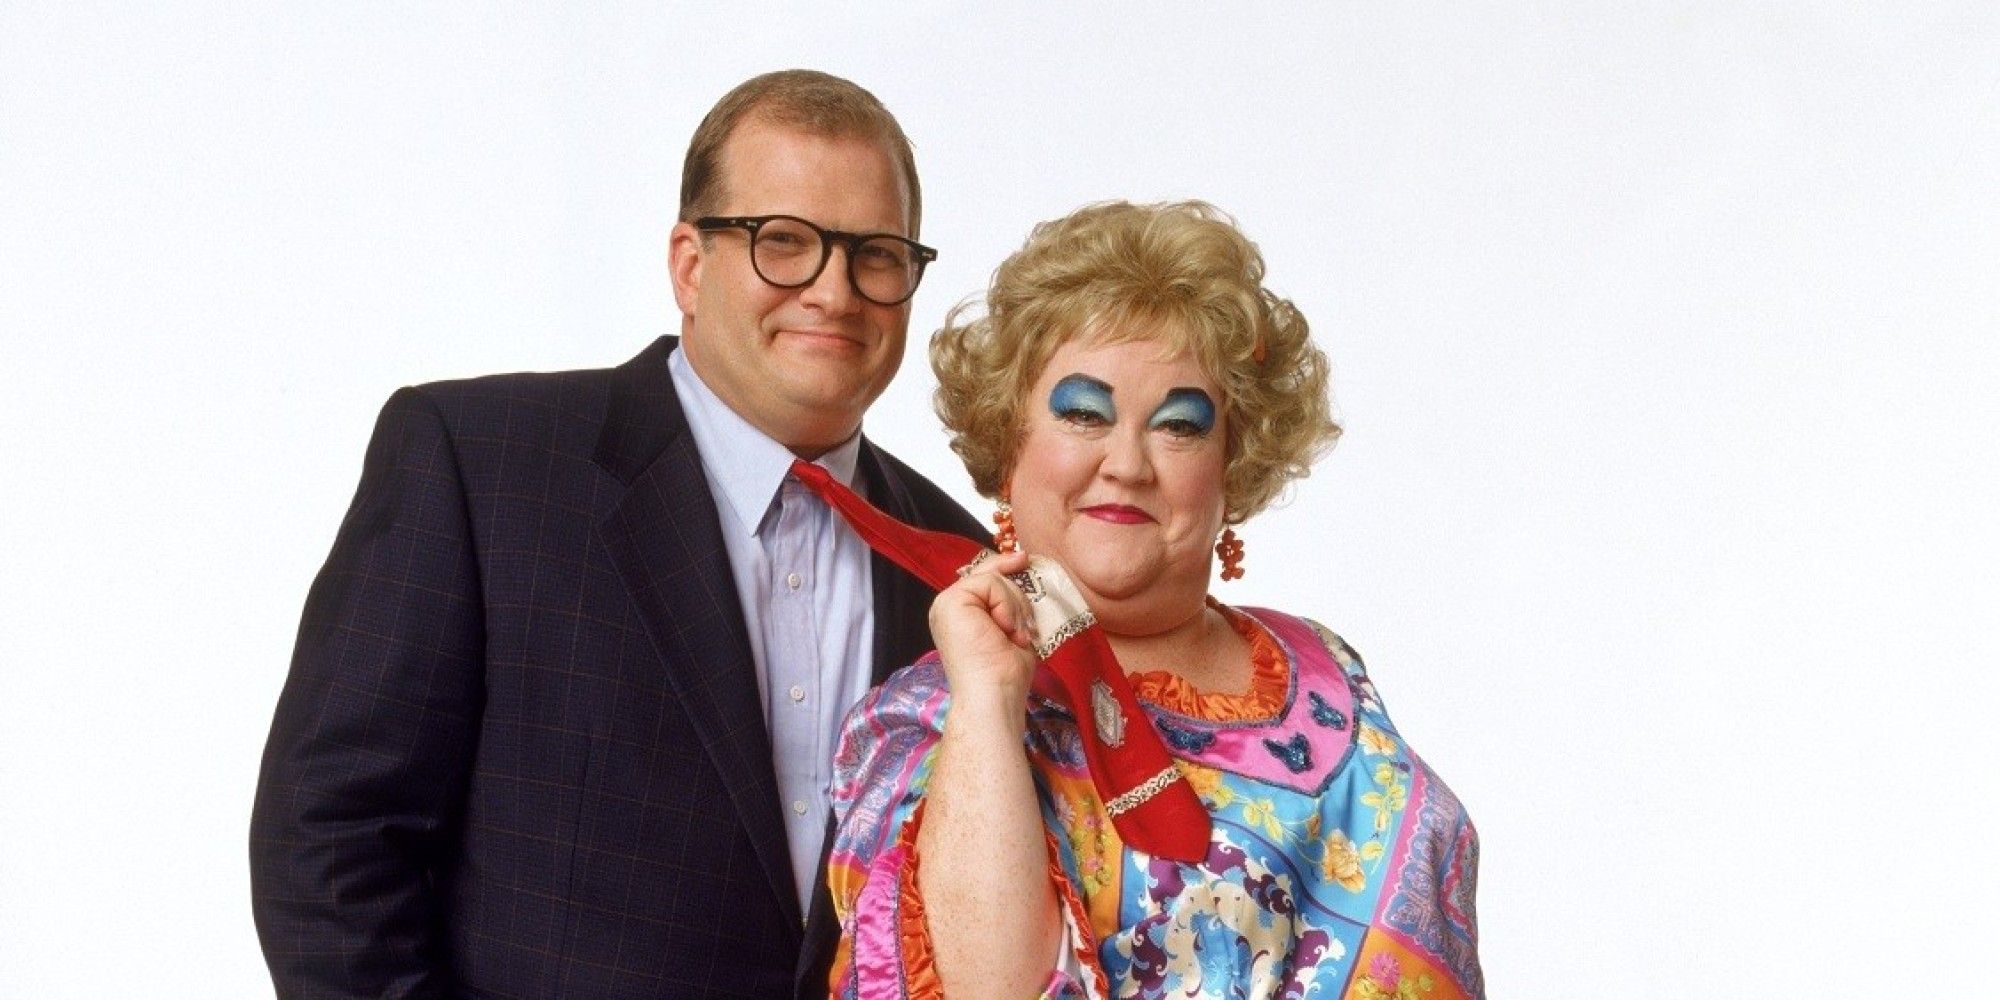 9. Drew Carey's Blonde Hair: The Inspiration Behind the New Look - wide 9